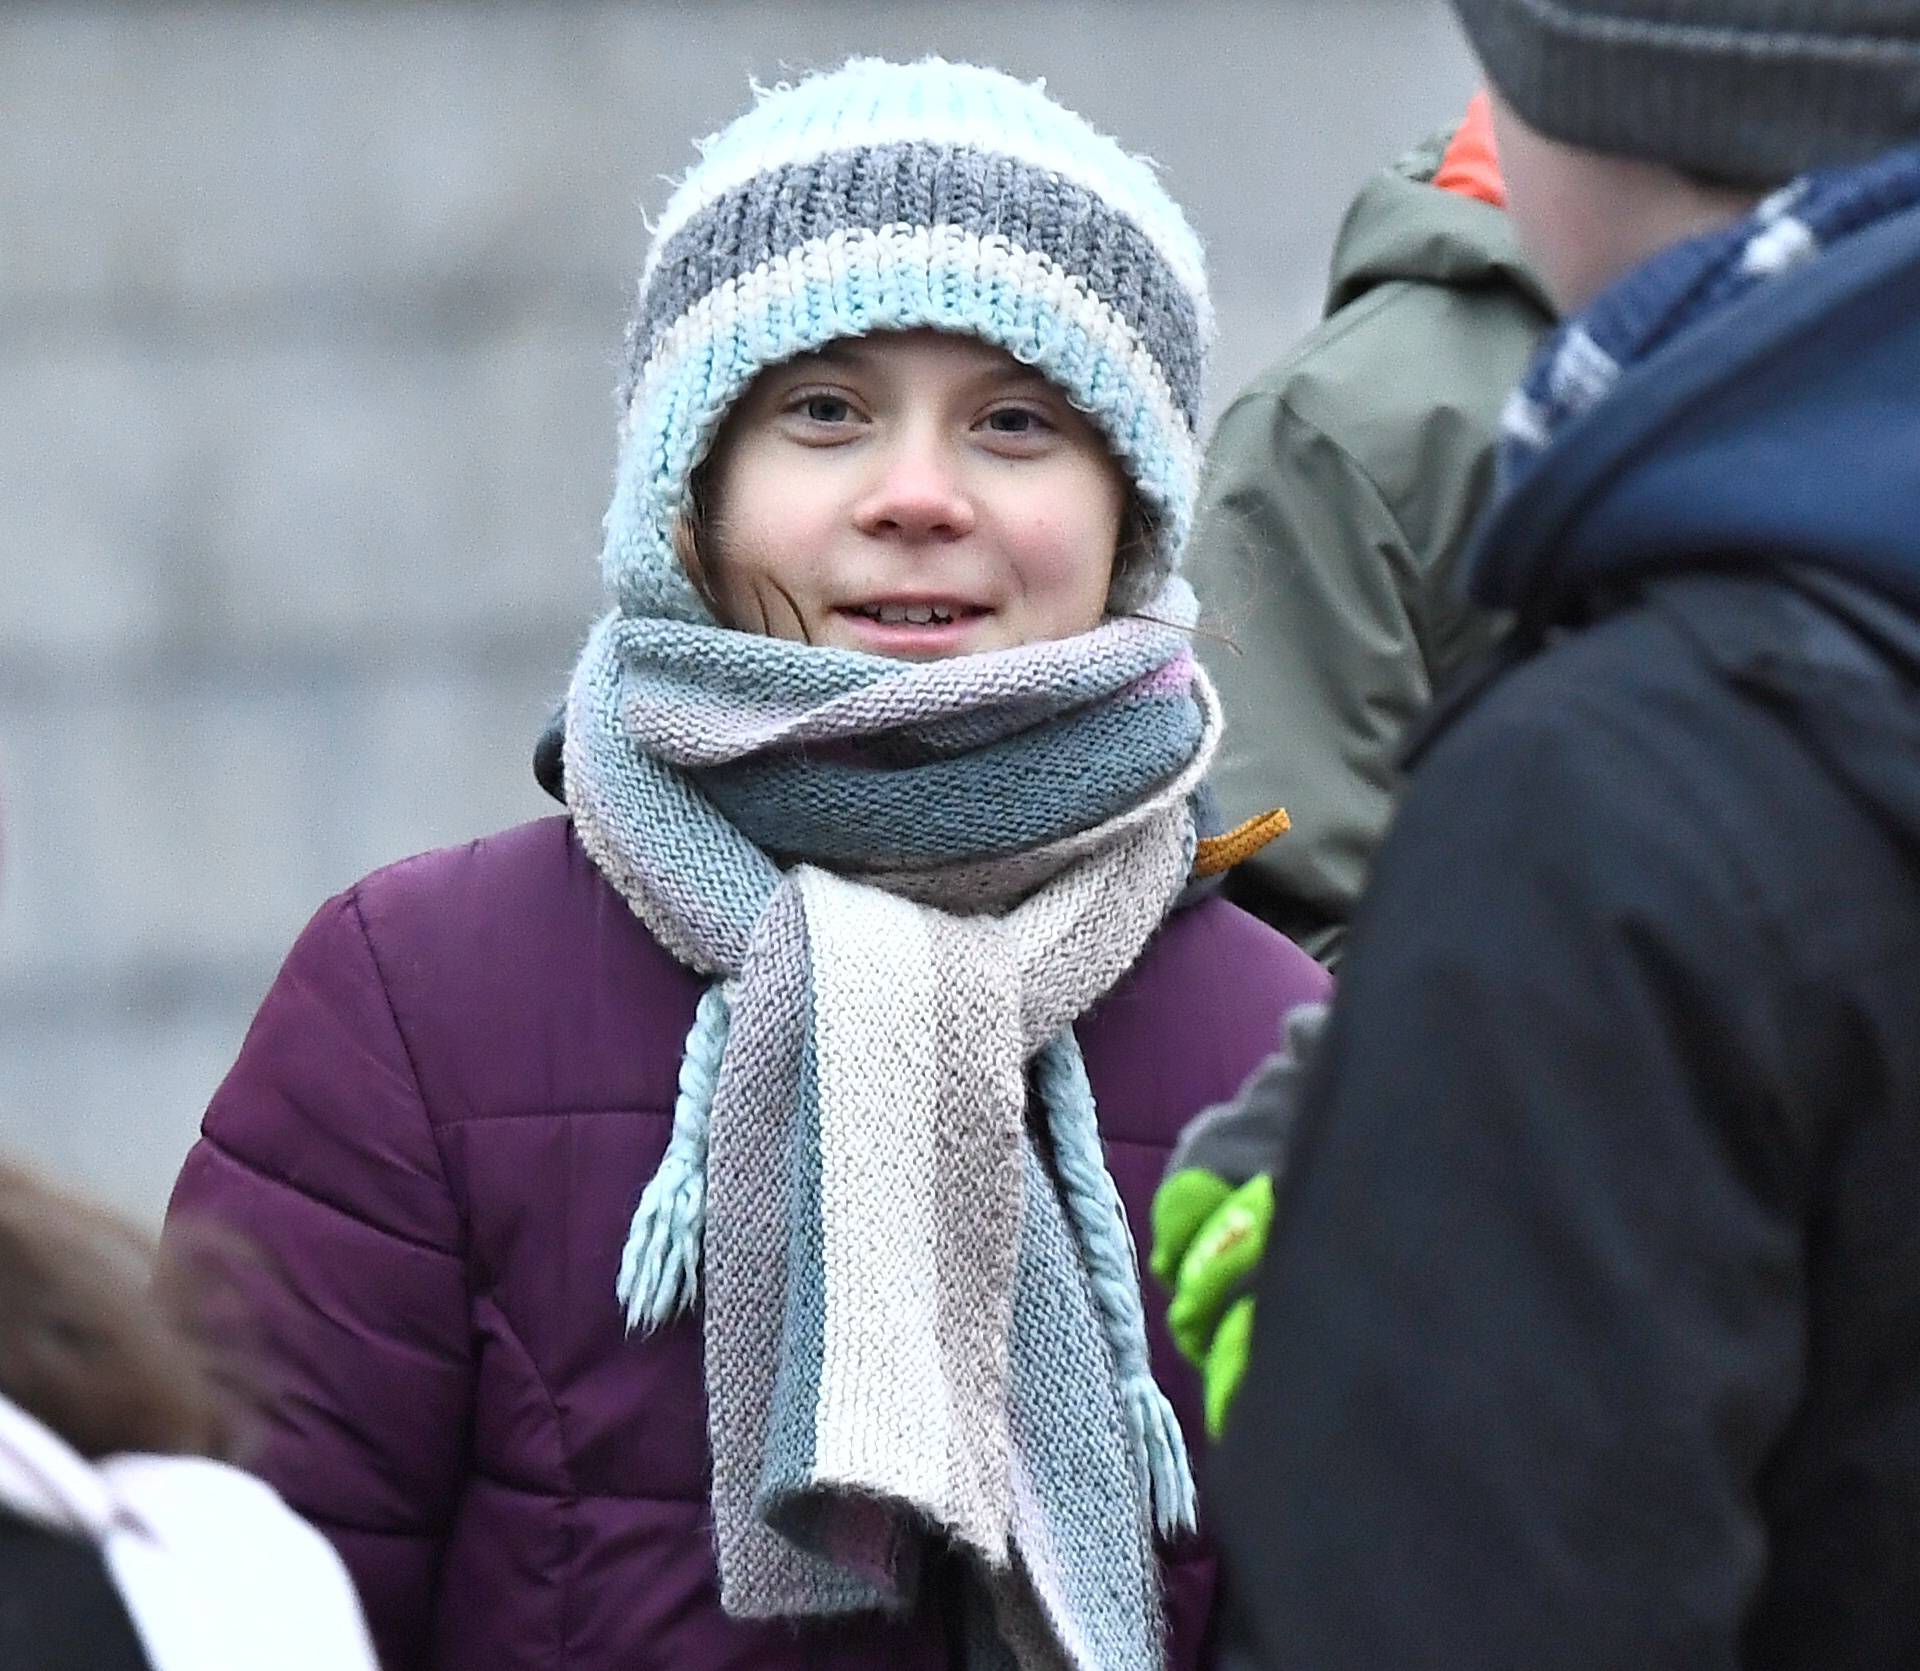 Swedish environmental activist Greta Thunberg celebrates her 17th birthday by attending the weekly "Fridays For Future" climate strike outside the Swedish parliament Riksdagen in Stockholm